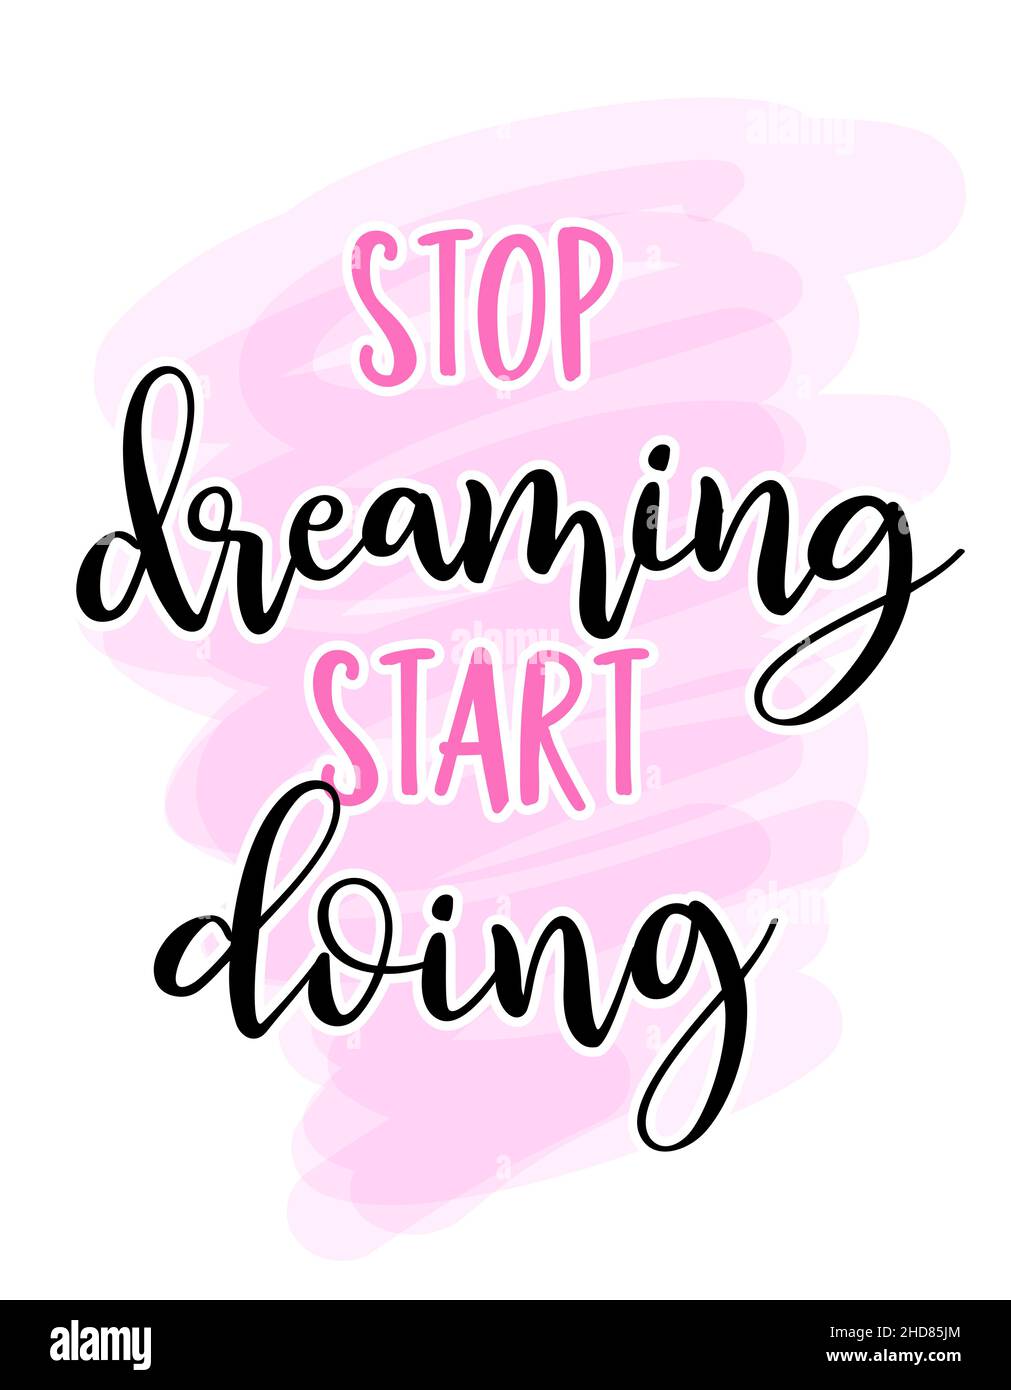 Stop dreaming, start doing - Hand drawn lettering quote. Vector illustration. Good for mindfulness coaching, poster, textile, gift, lovely text. Stock Vector